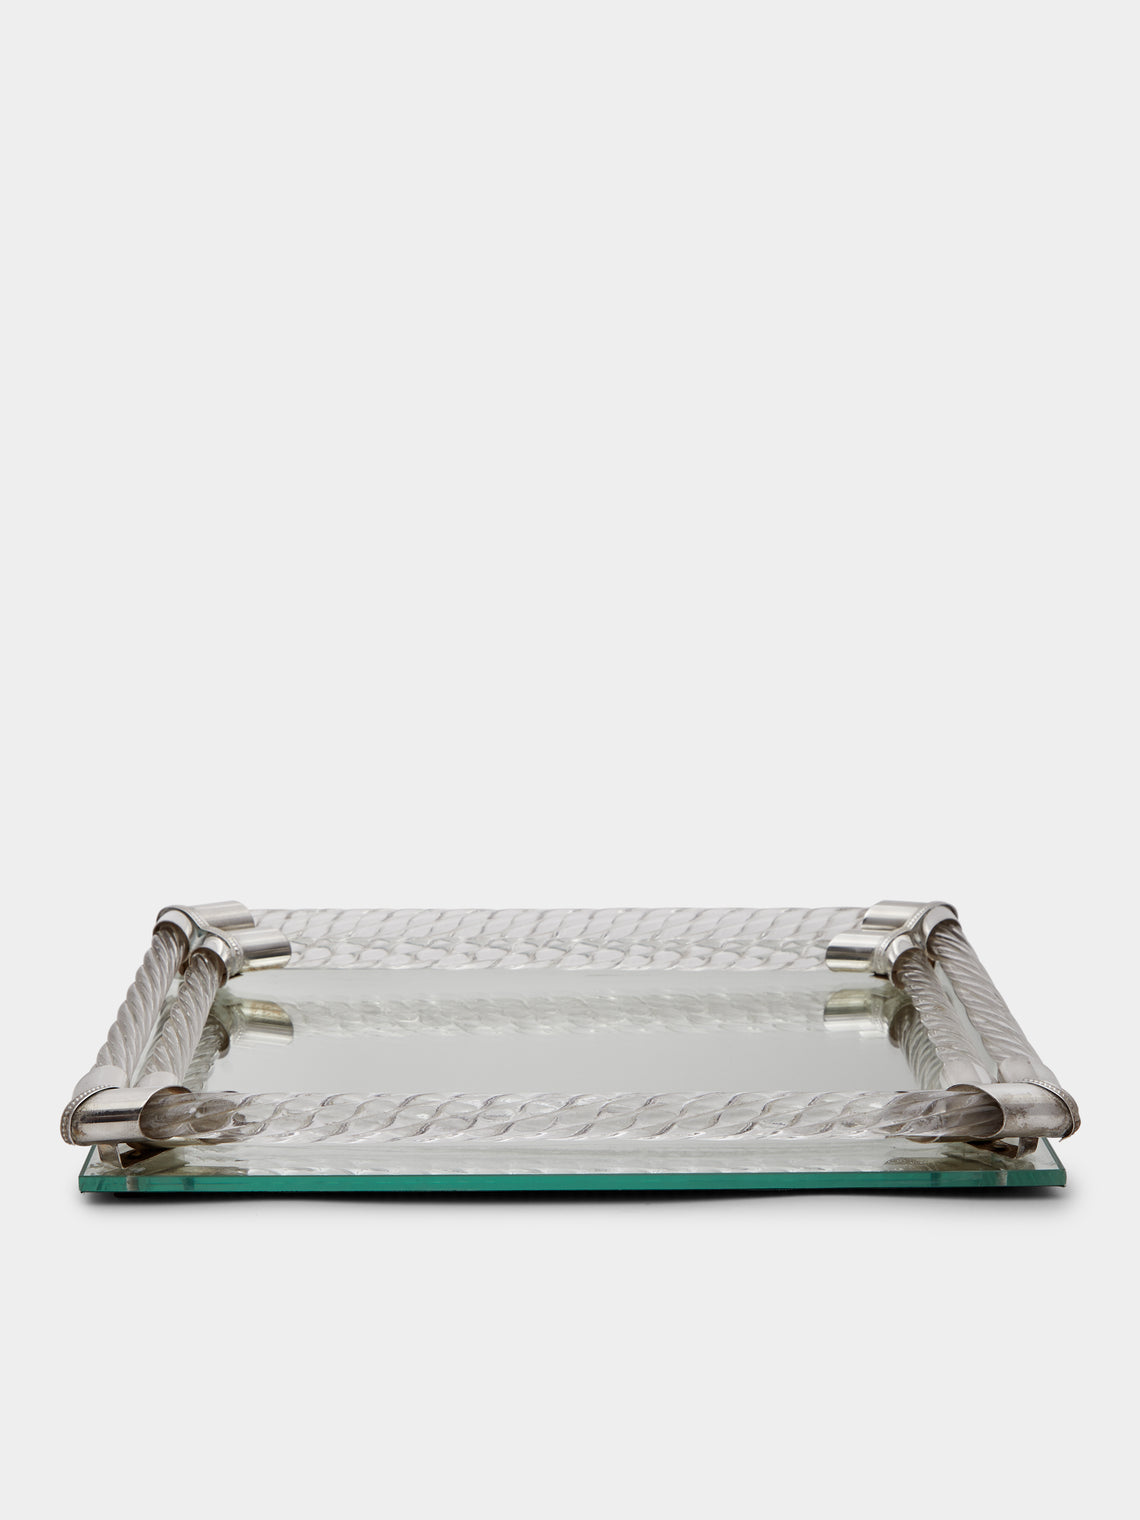 Antique and Vintage - 1950s Murano Torciglioni Art Deco Tray - Clear - ABASK - 